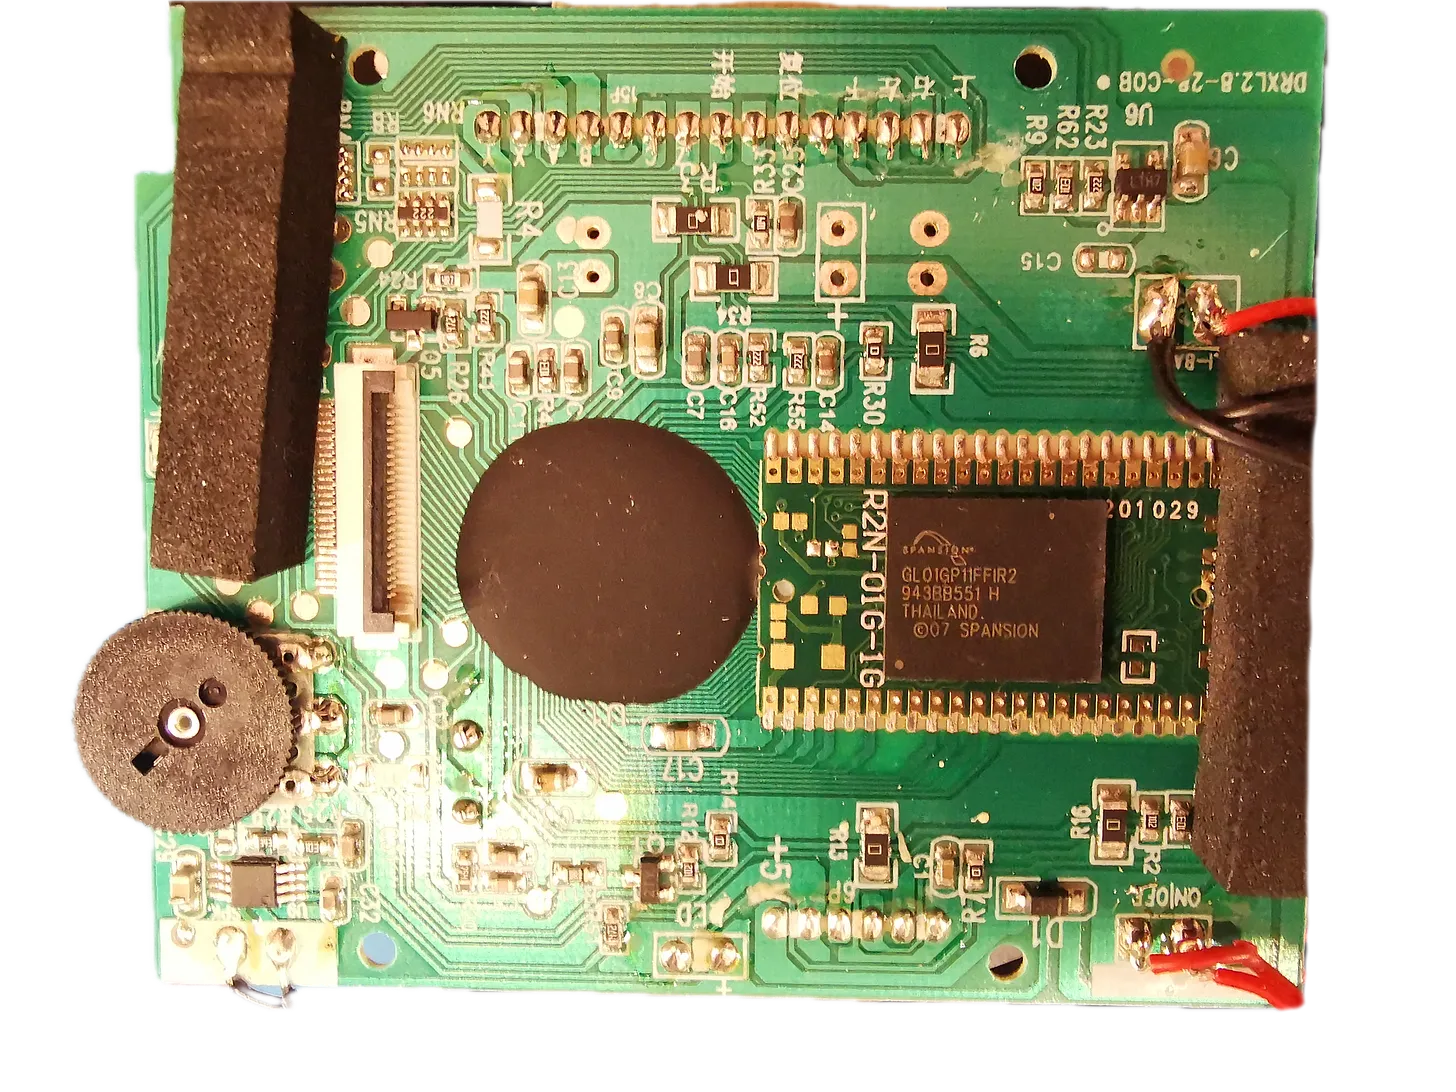 The Main PCB - With a Blob